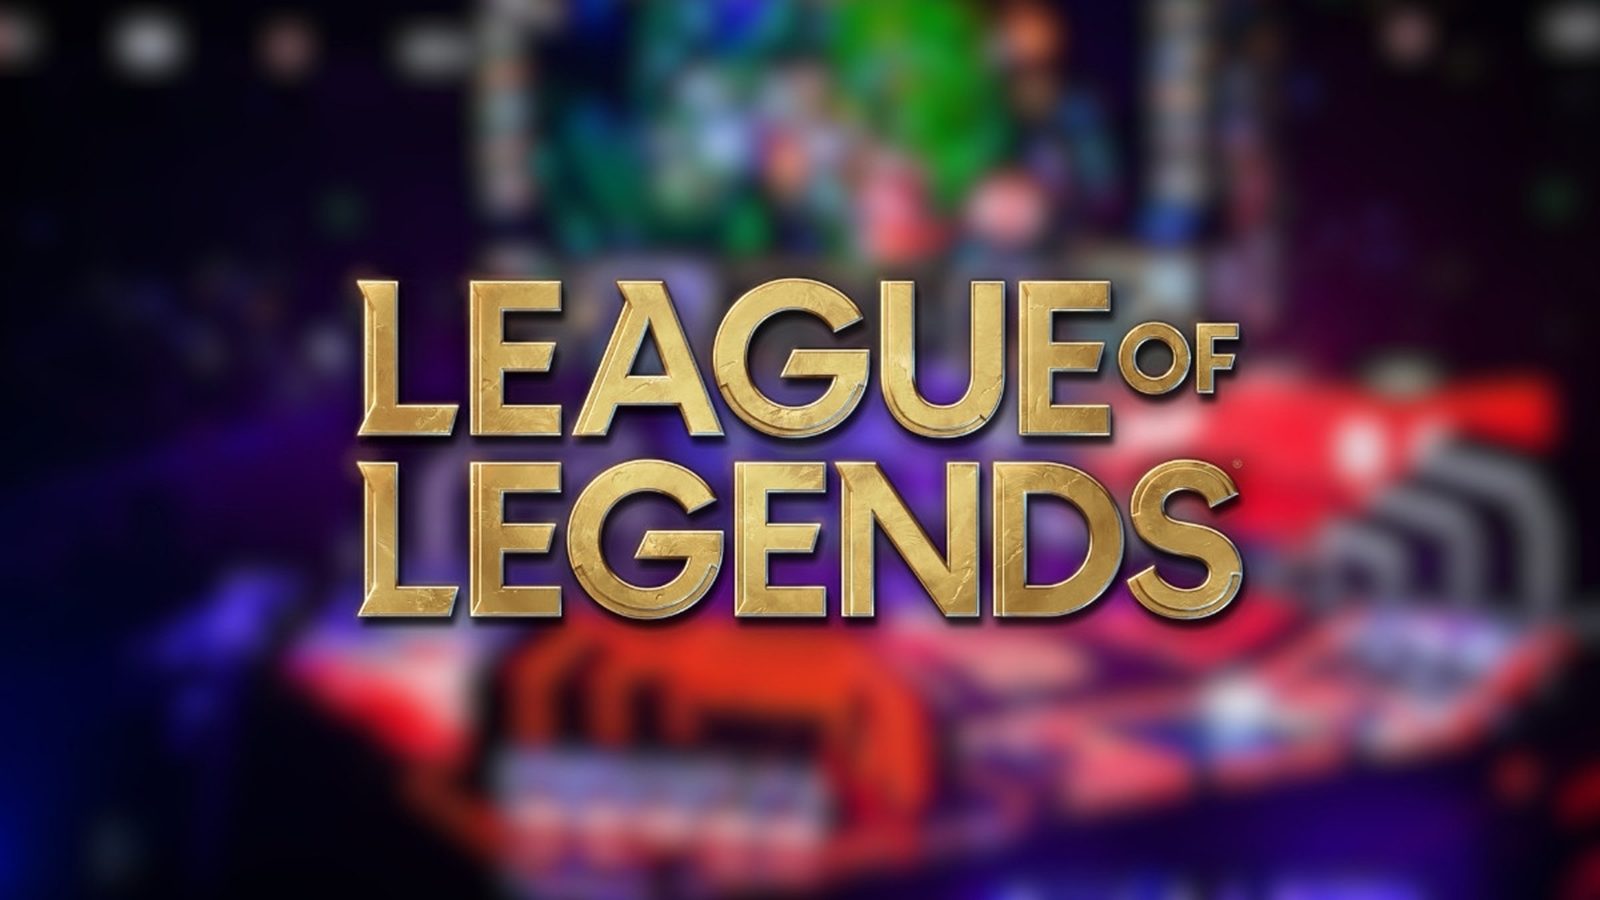 League of Legends Esports Players Vote Overwhelmingly for Walkout